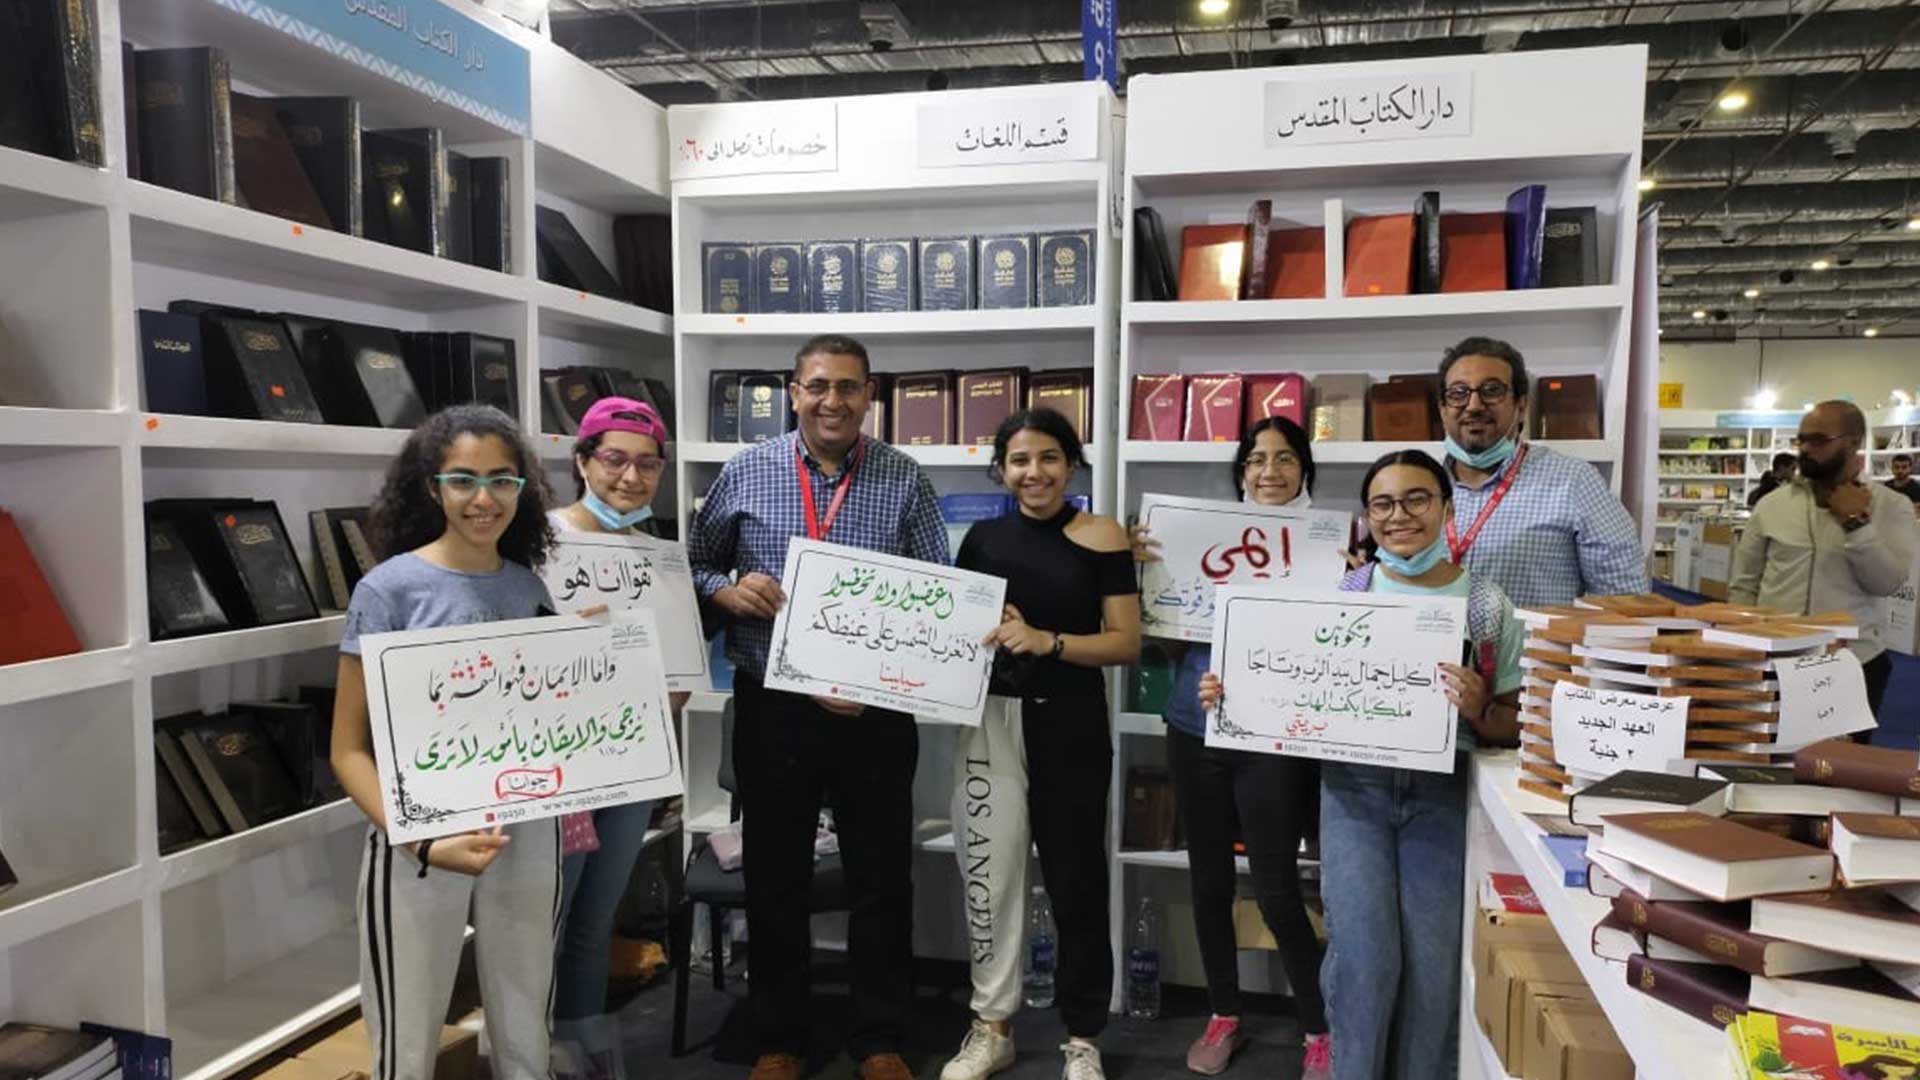 Bible Society stall packed at Middle East’s biggest book fair in Cairo